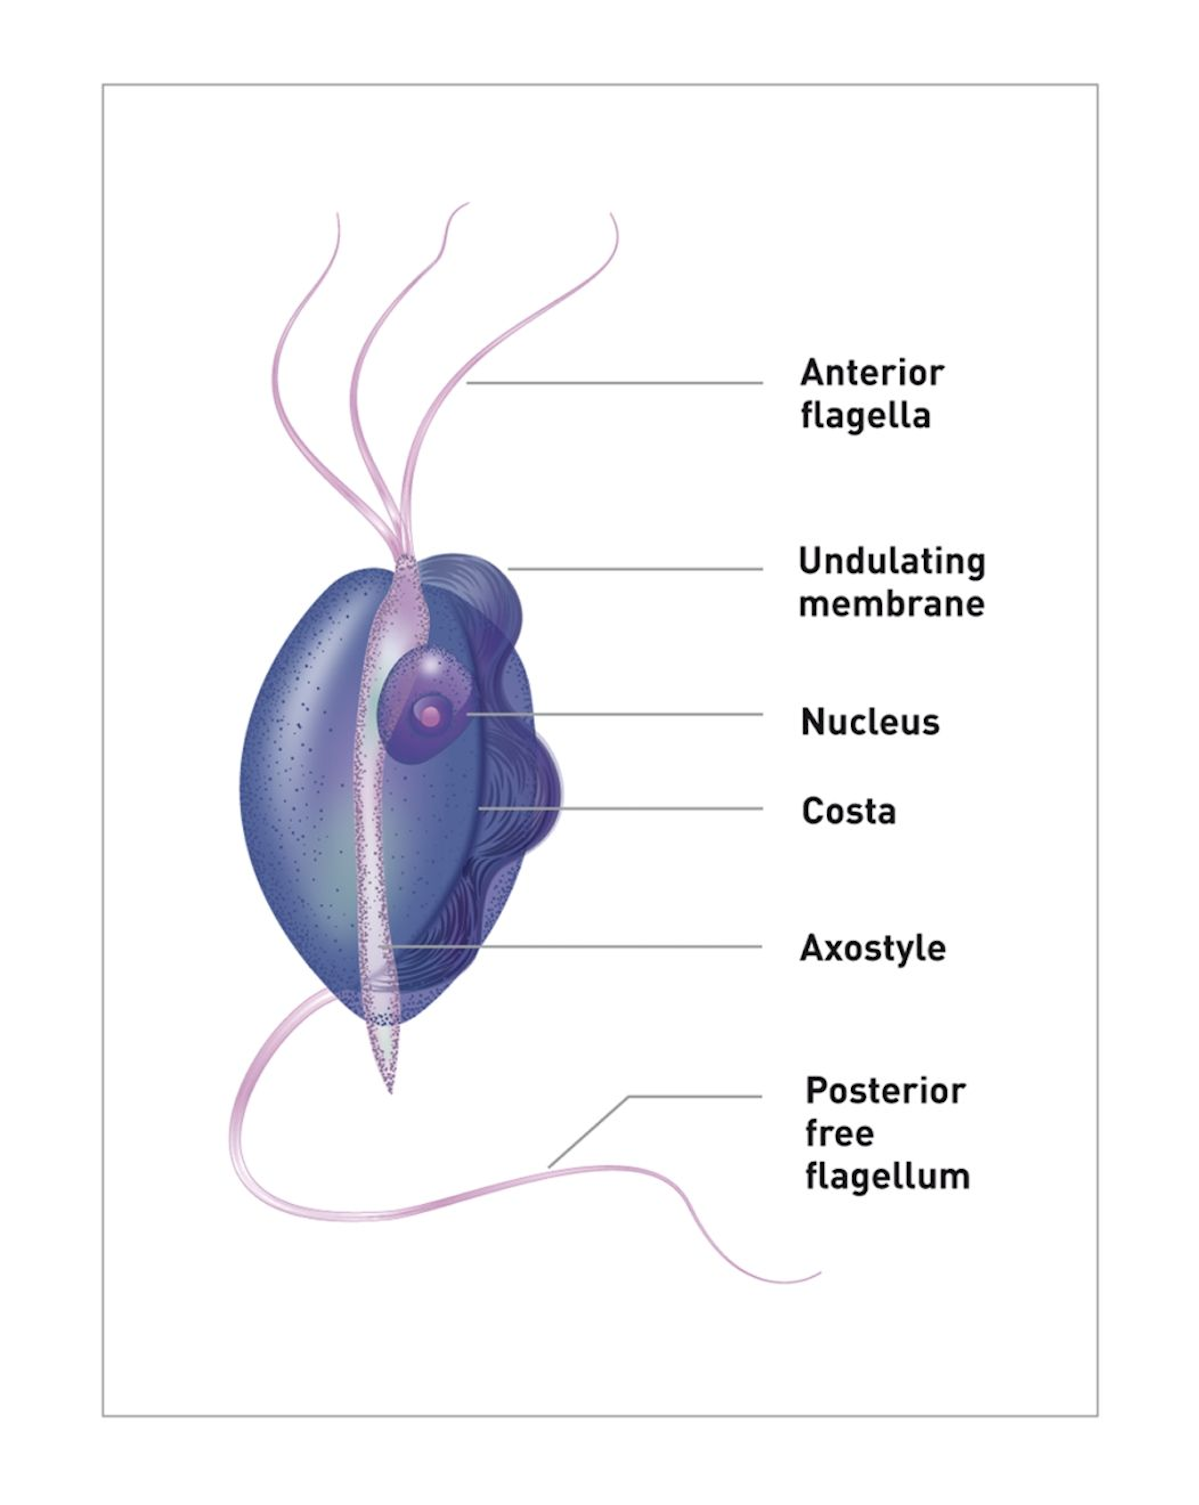 T. foetus is approximately 10-26 µm long and roughly 3-5 µm wide, and is often described as “pear-shaped” or “spindle-shaped” in form. Each organism has three anterior flagellae for motility.